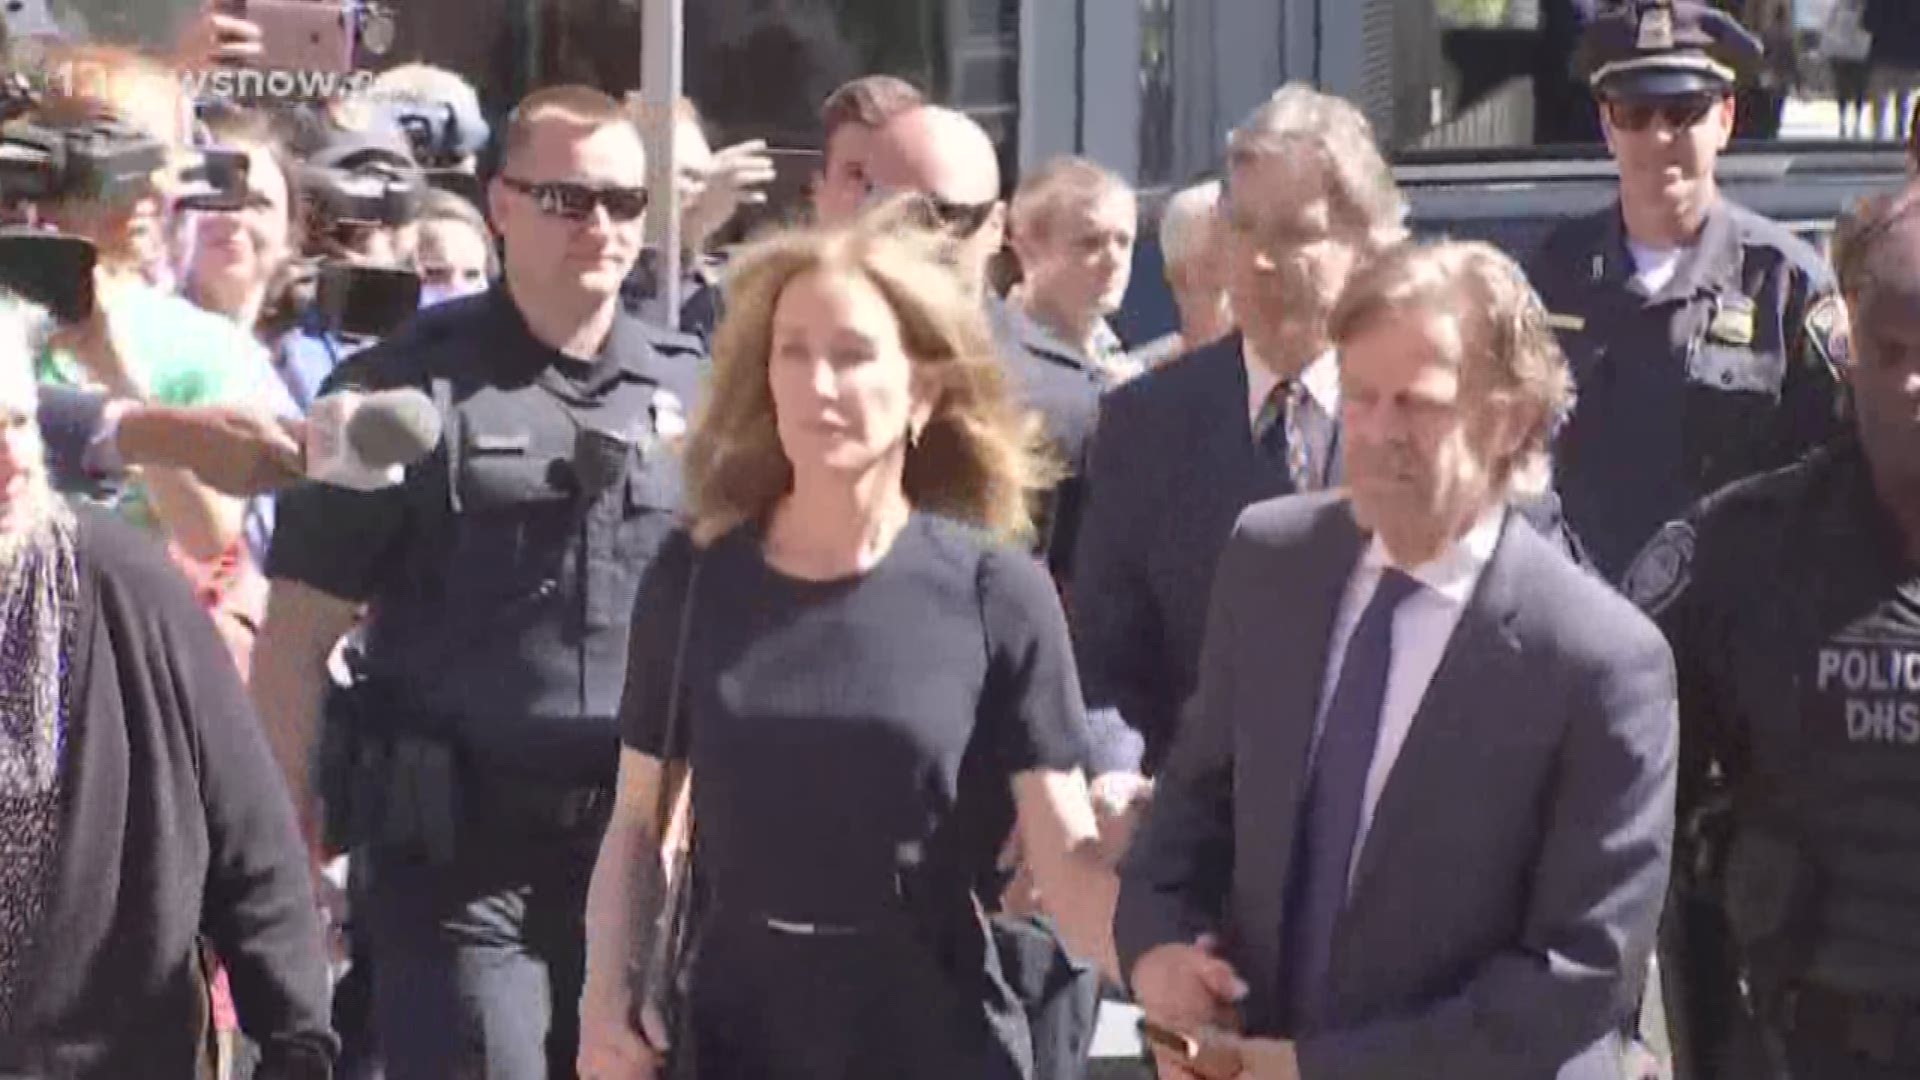 Felicity Huffman has been released from prison on the 11th day of her 14-day sentence for her role in a college admissions scandal.